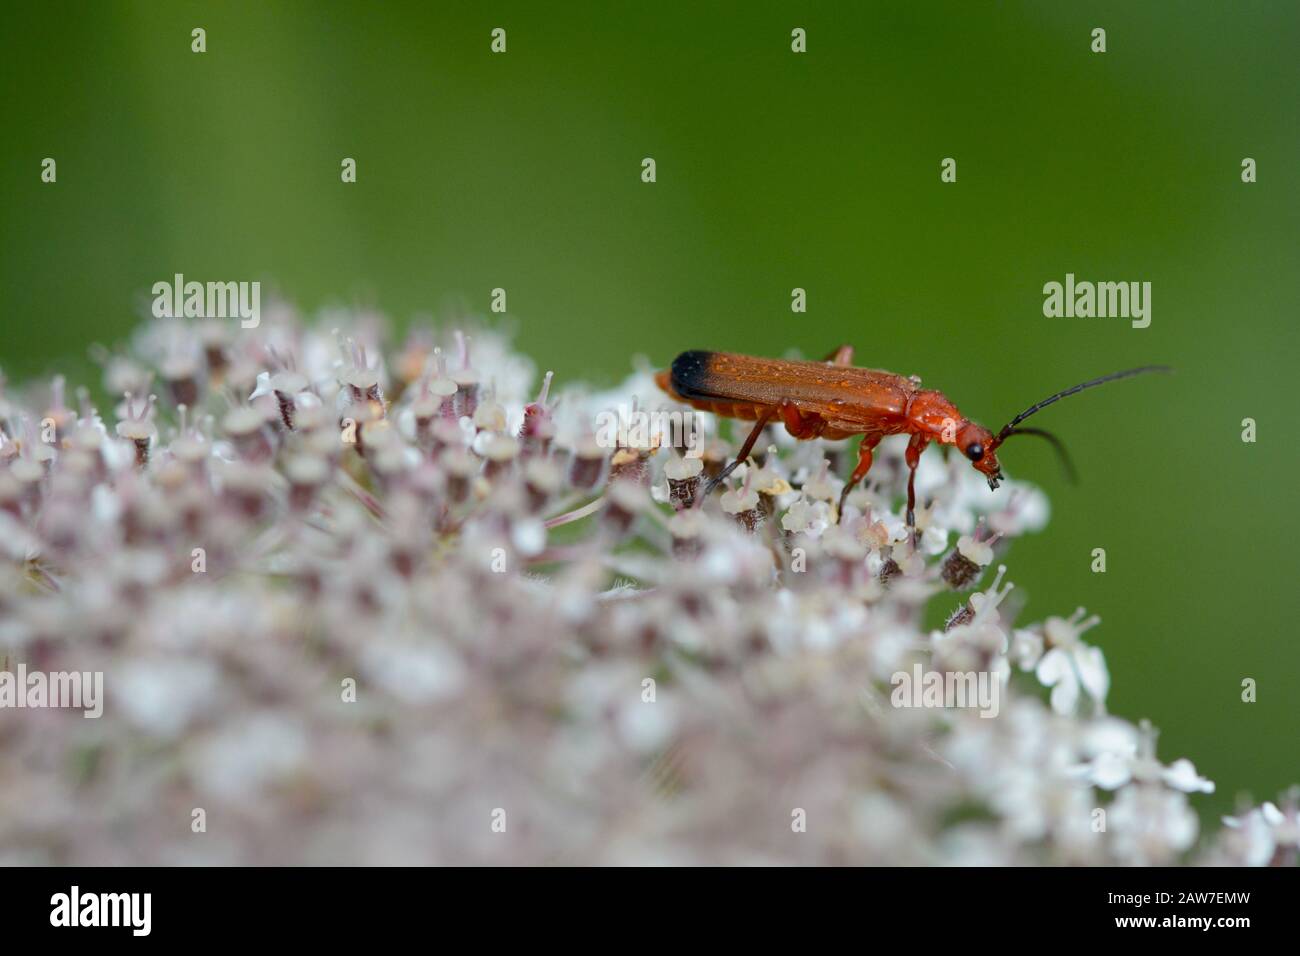 Soldier beetle on cow parsley Stock Photo